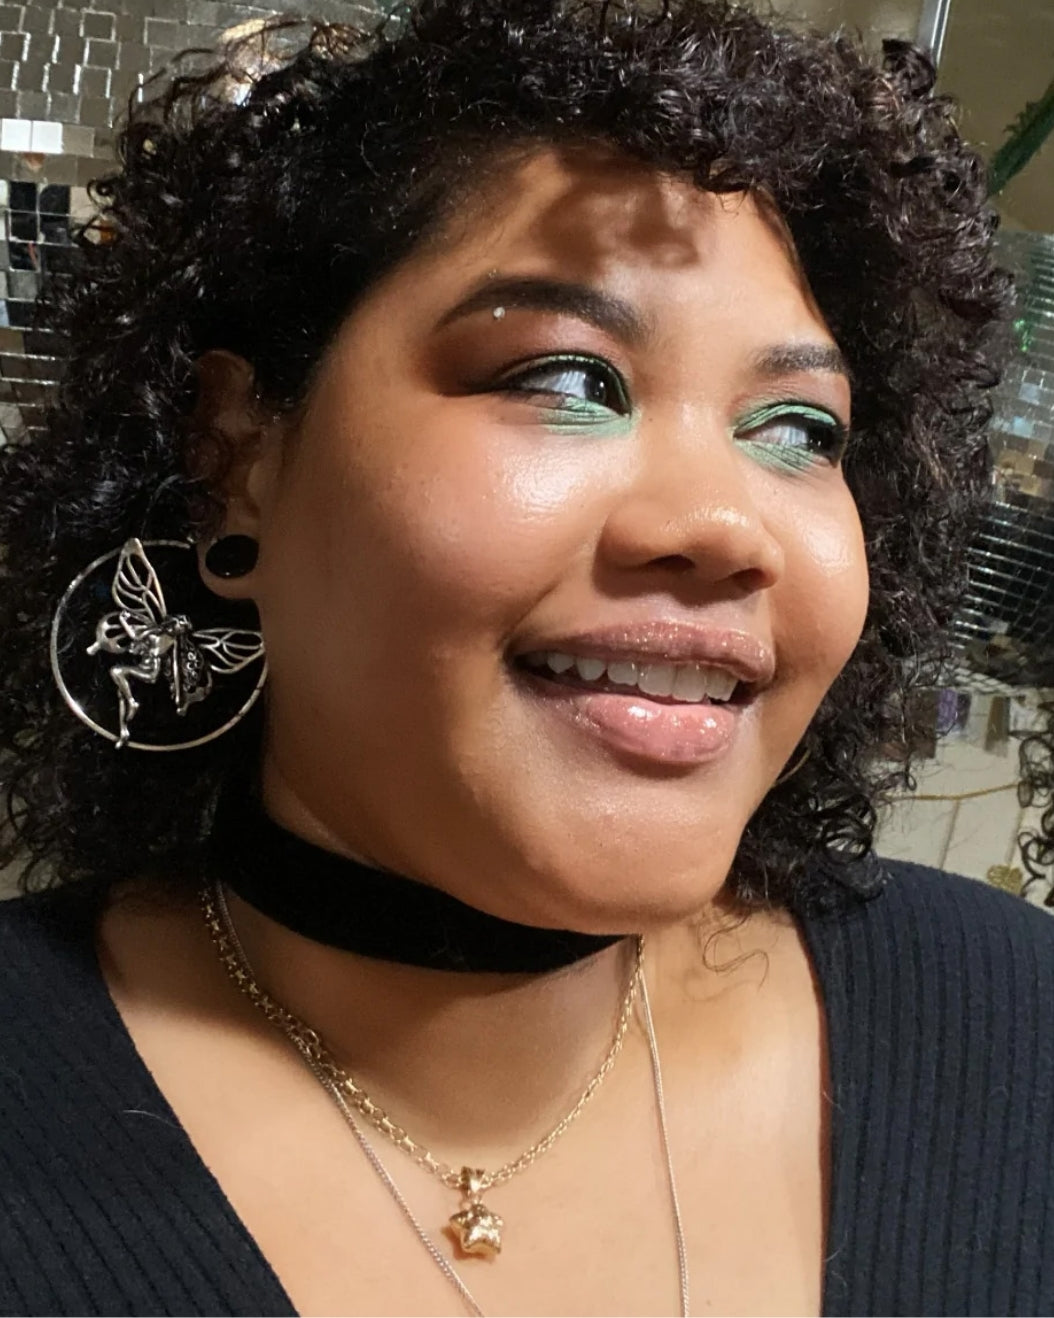 Portrait of a woman with green and brown eyeshadow to use as holiday makeup inspiration